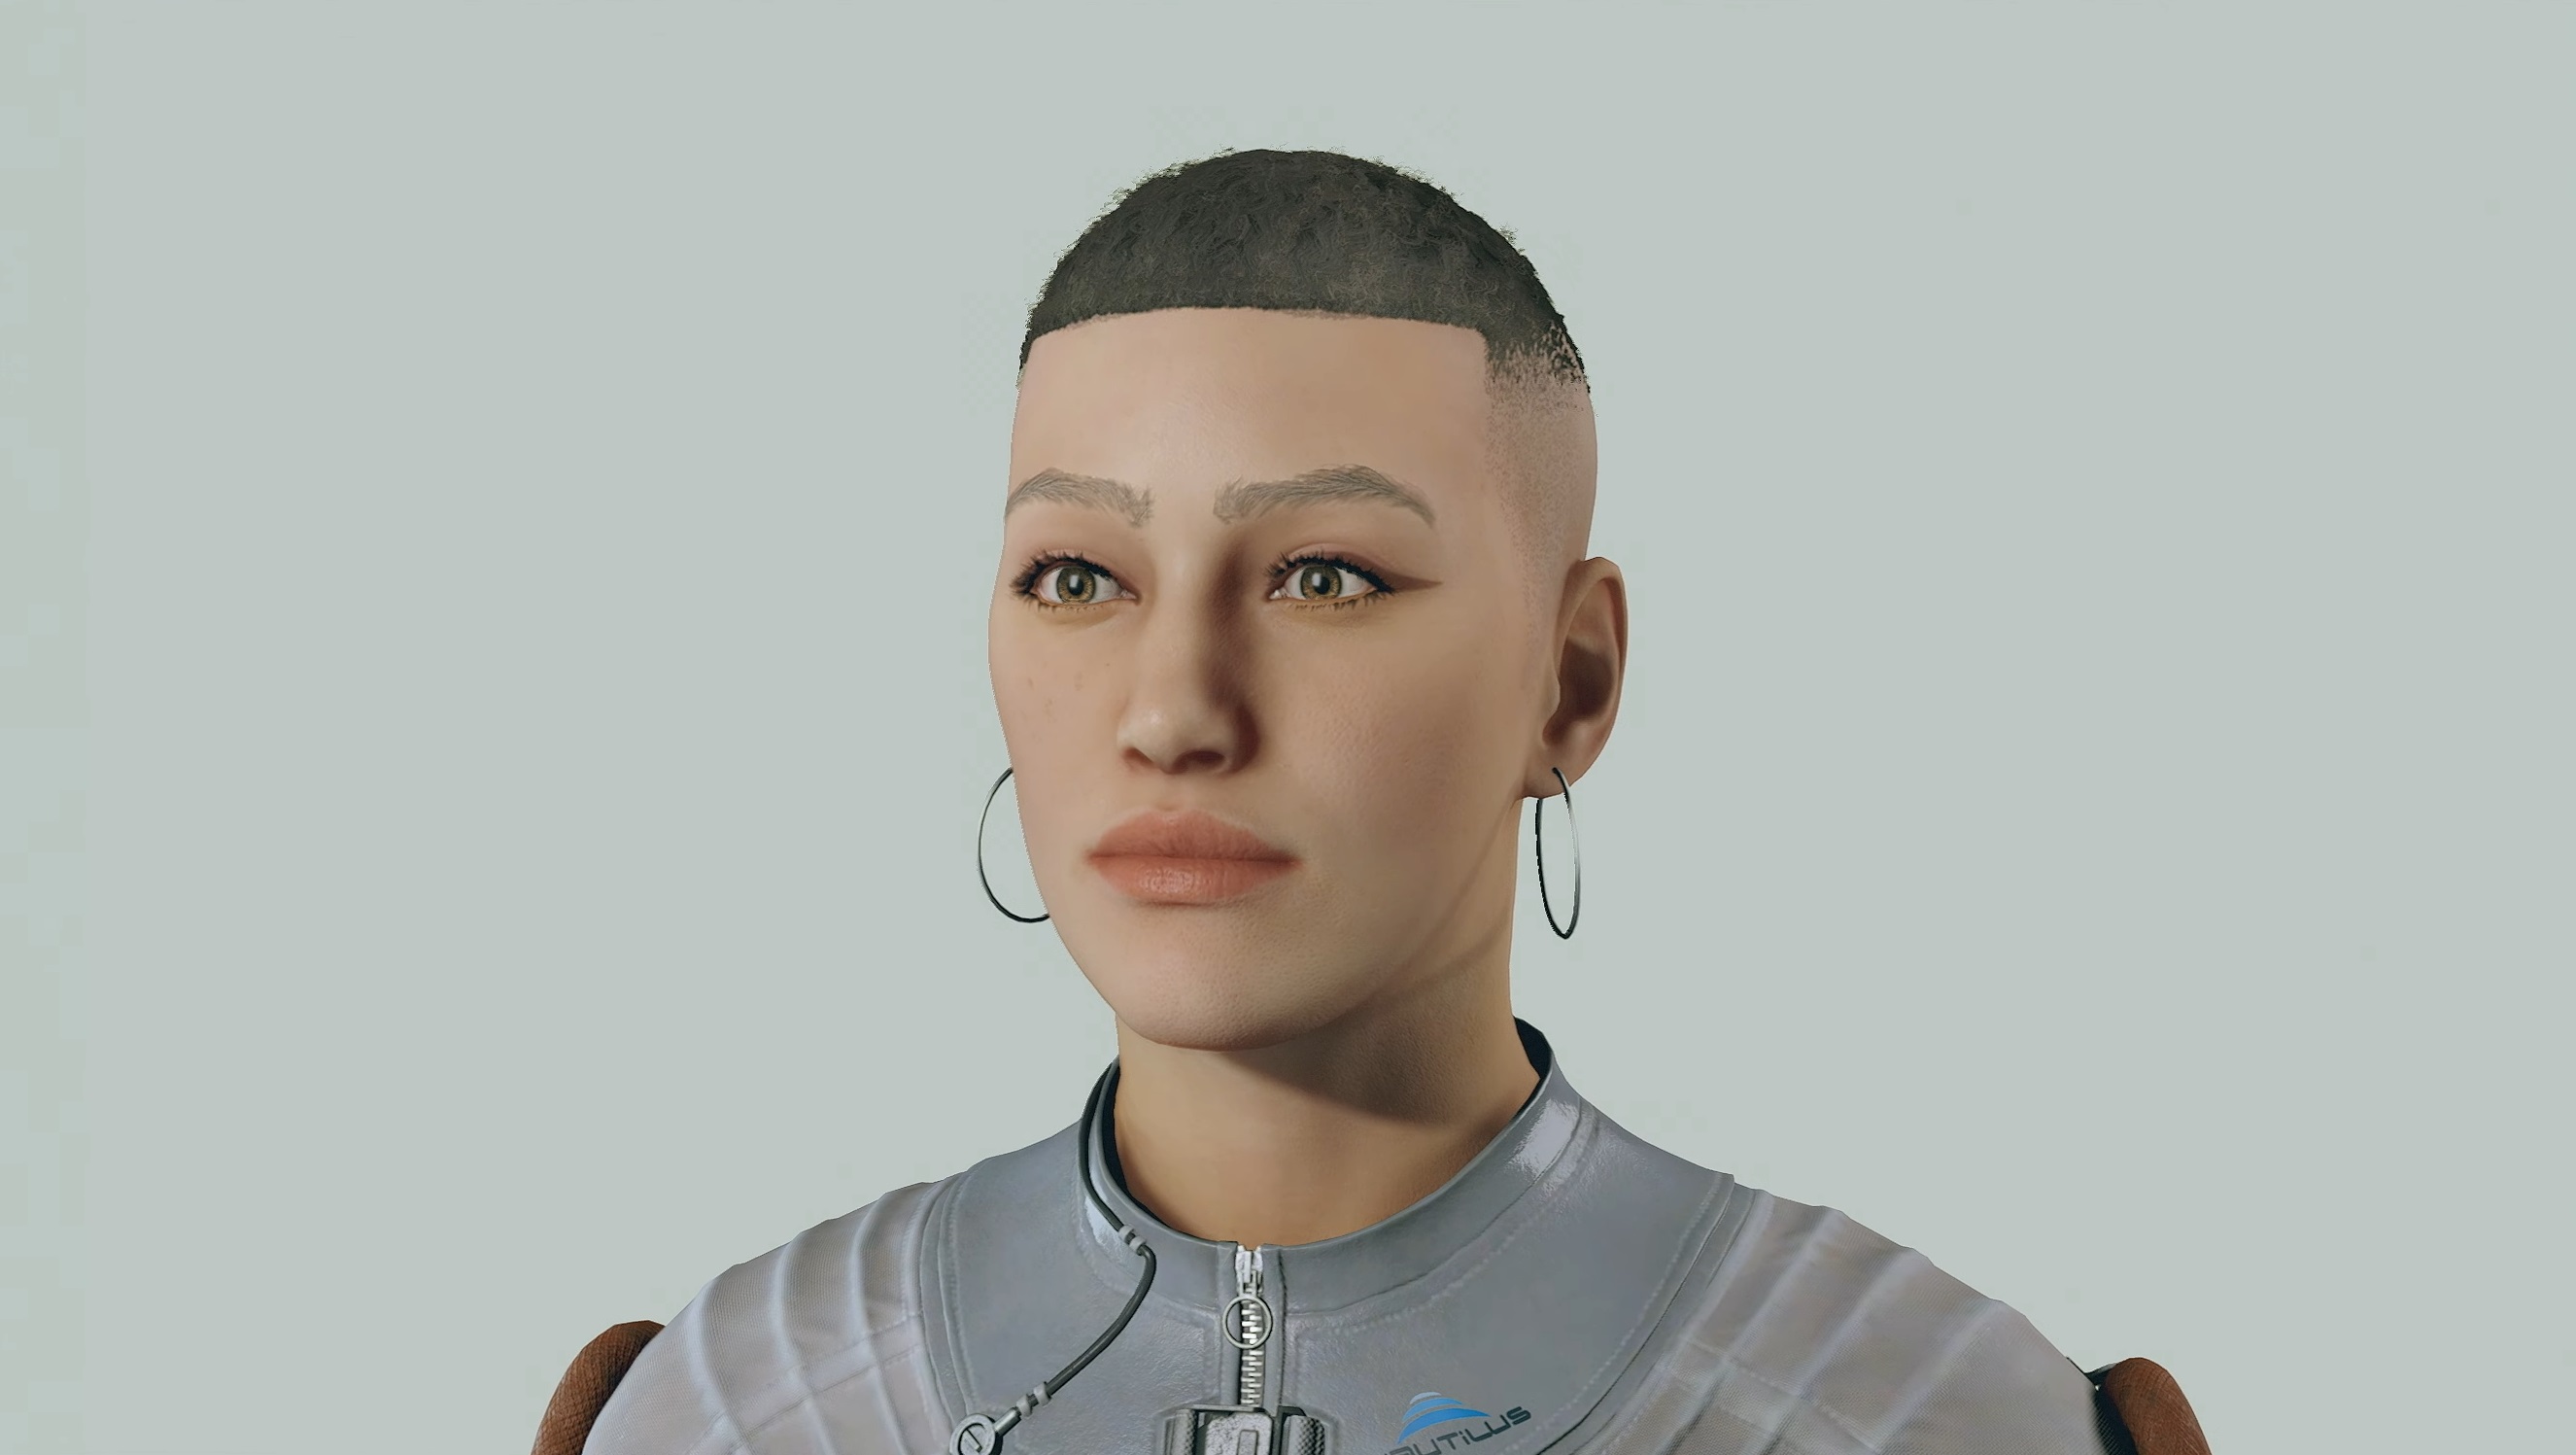 Pixelated hair on (almost) every character model